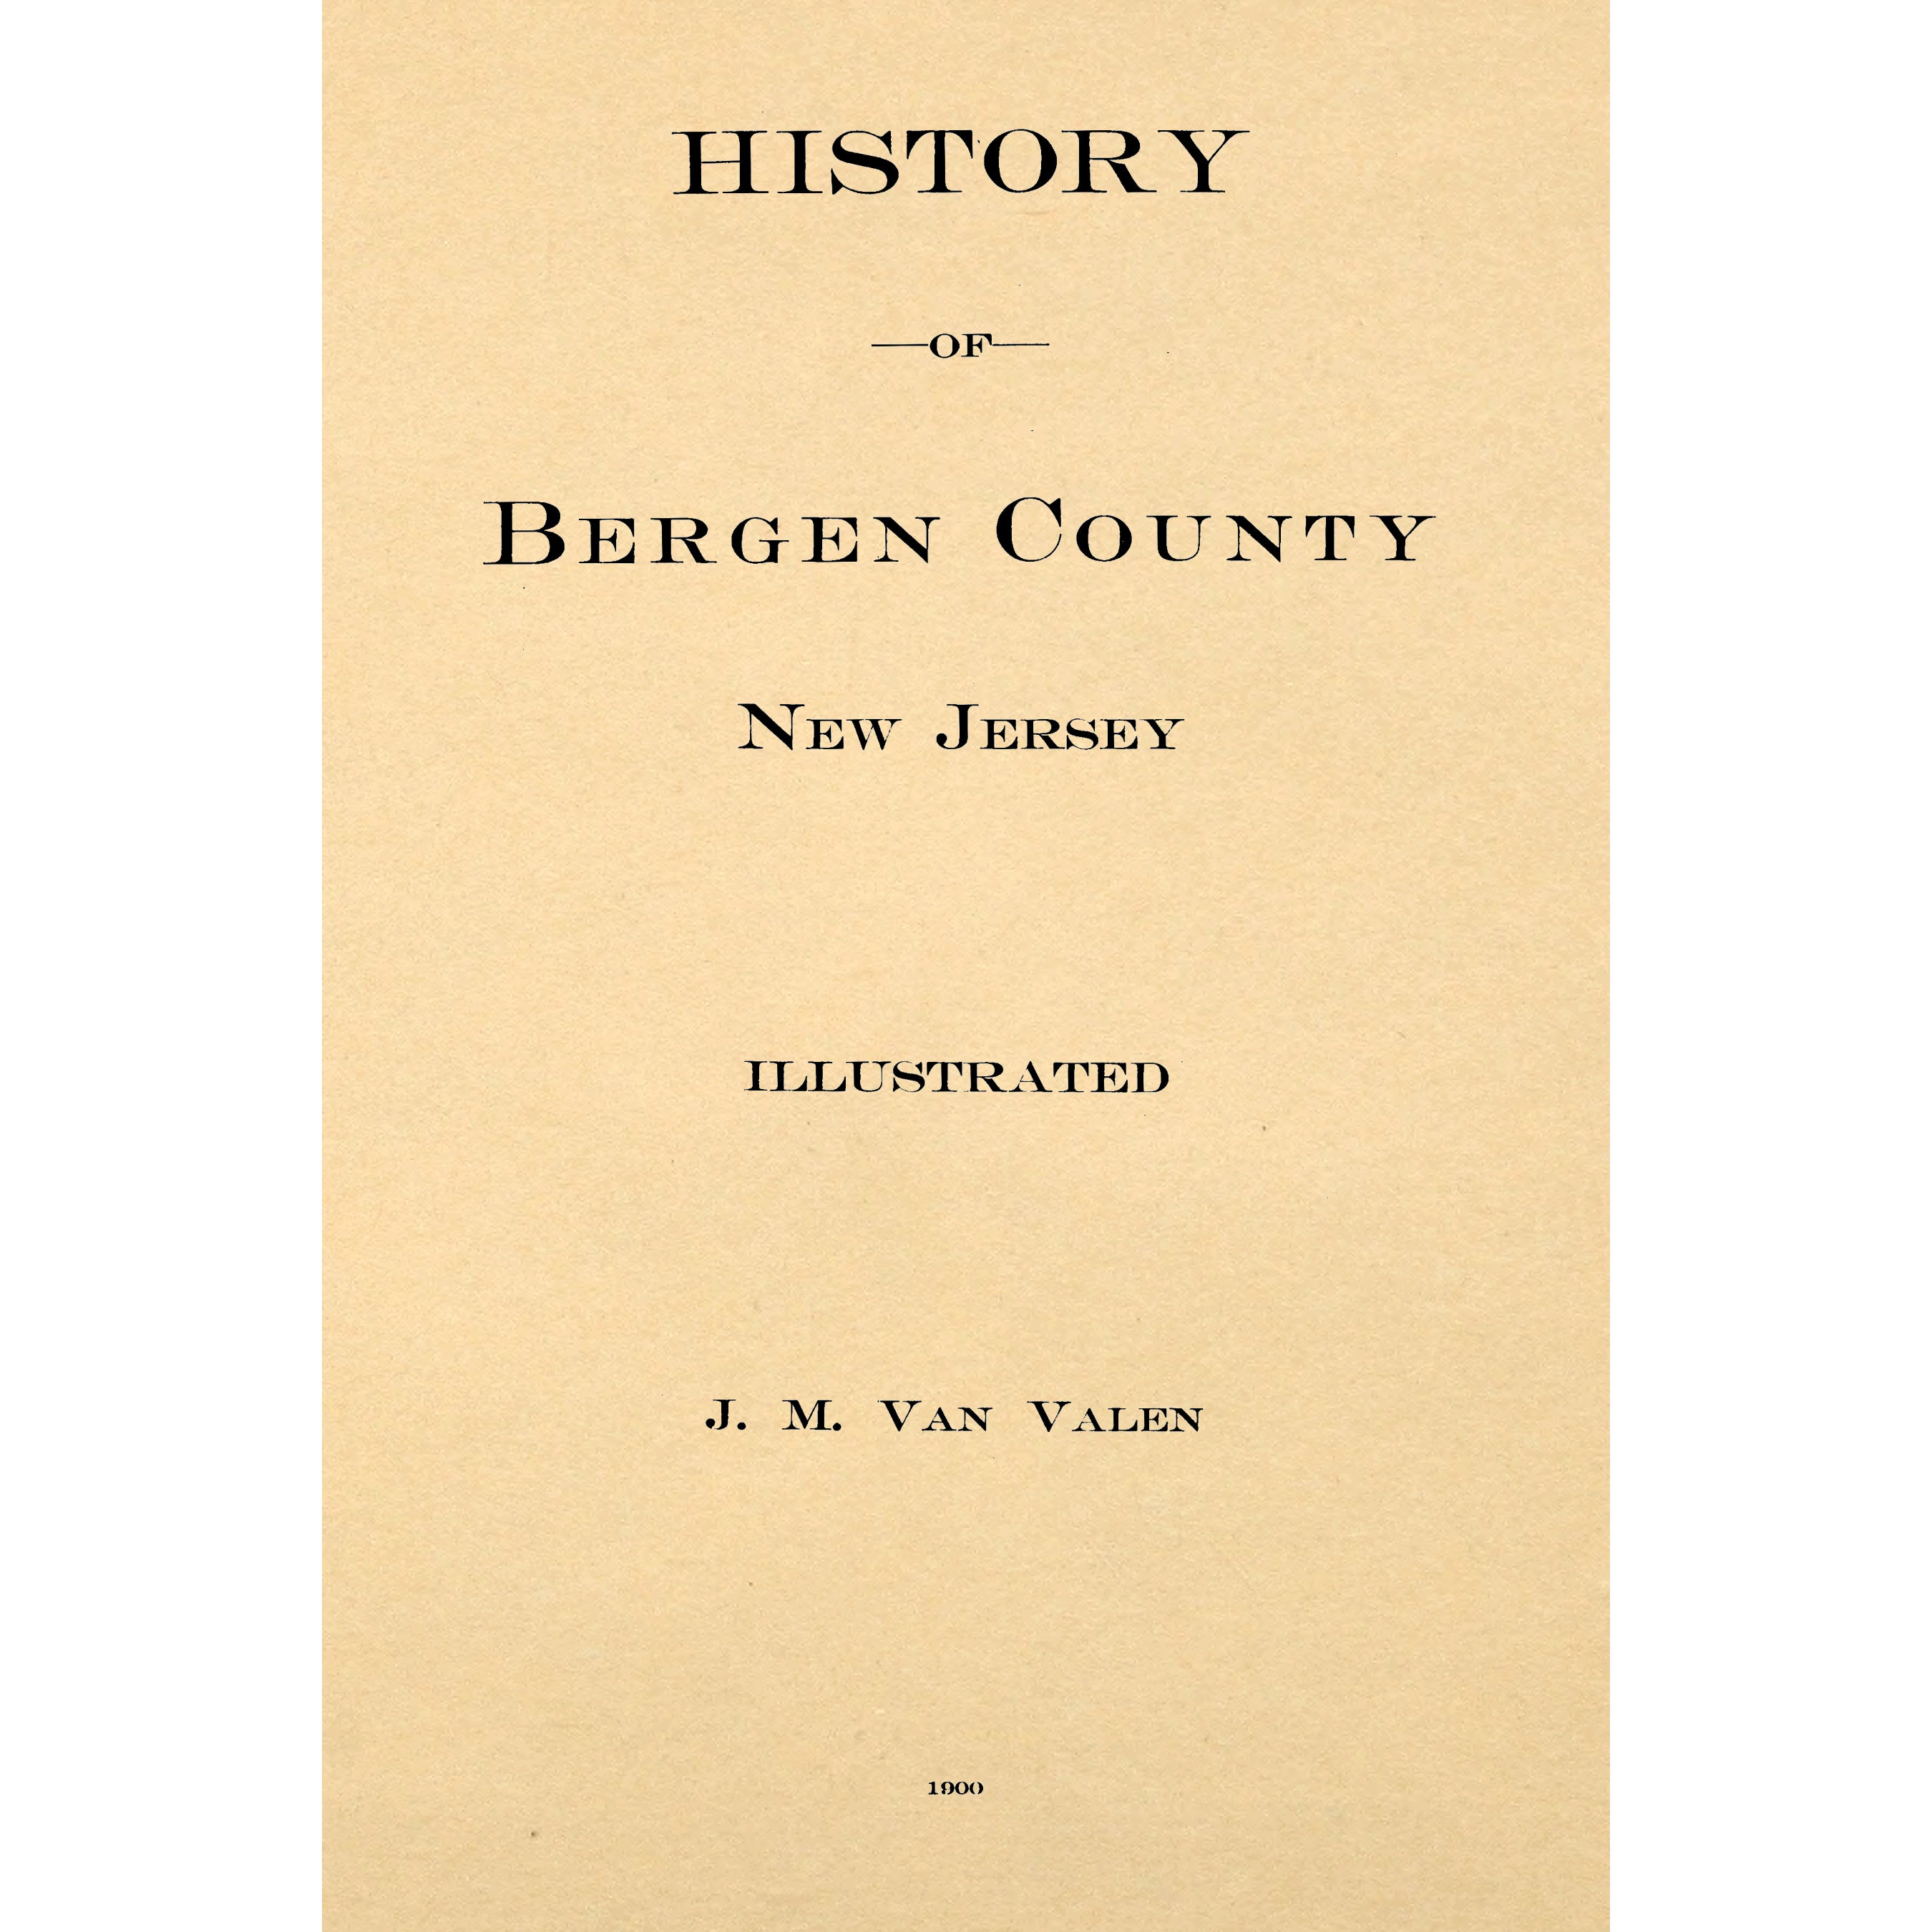 History of Bergen county, New Jersey